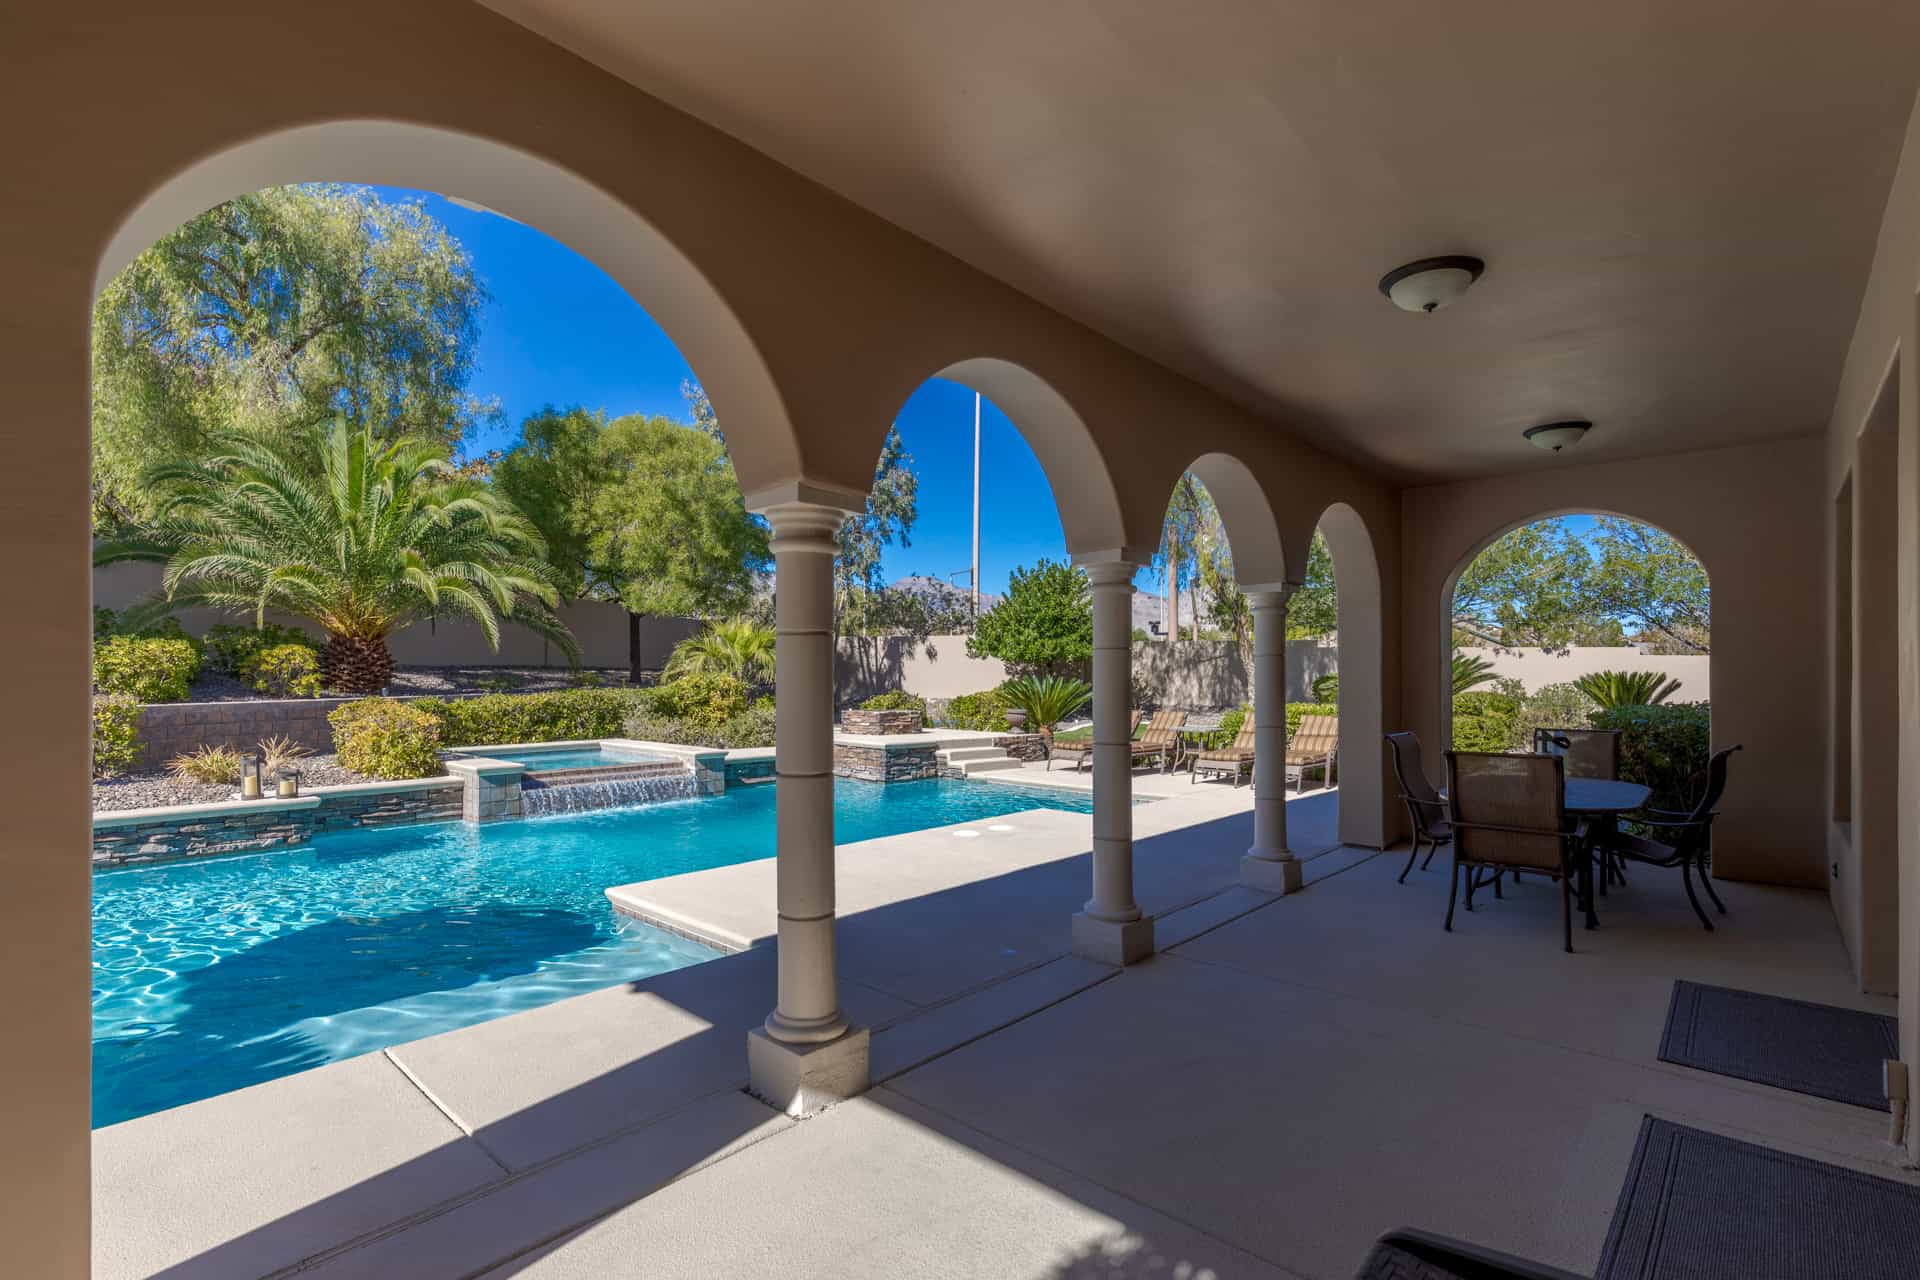 With two covered patios in the rear yard, an escape from the Vegas sun is never far.